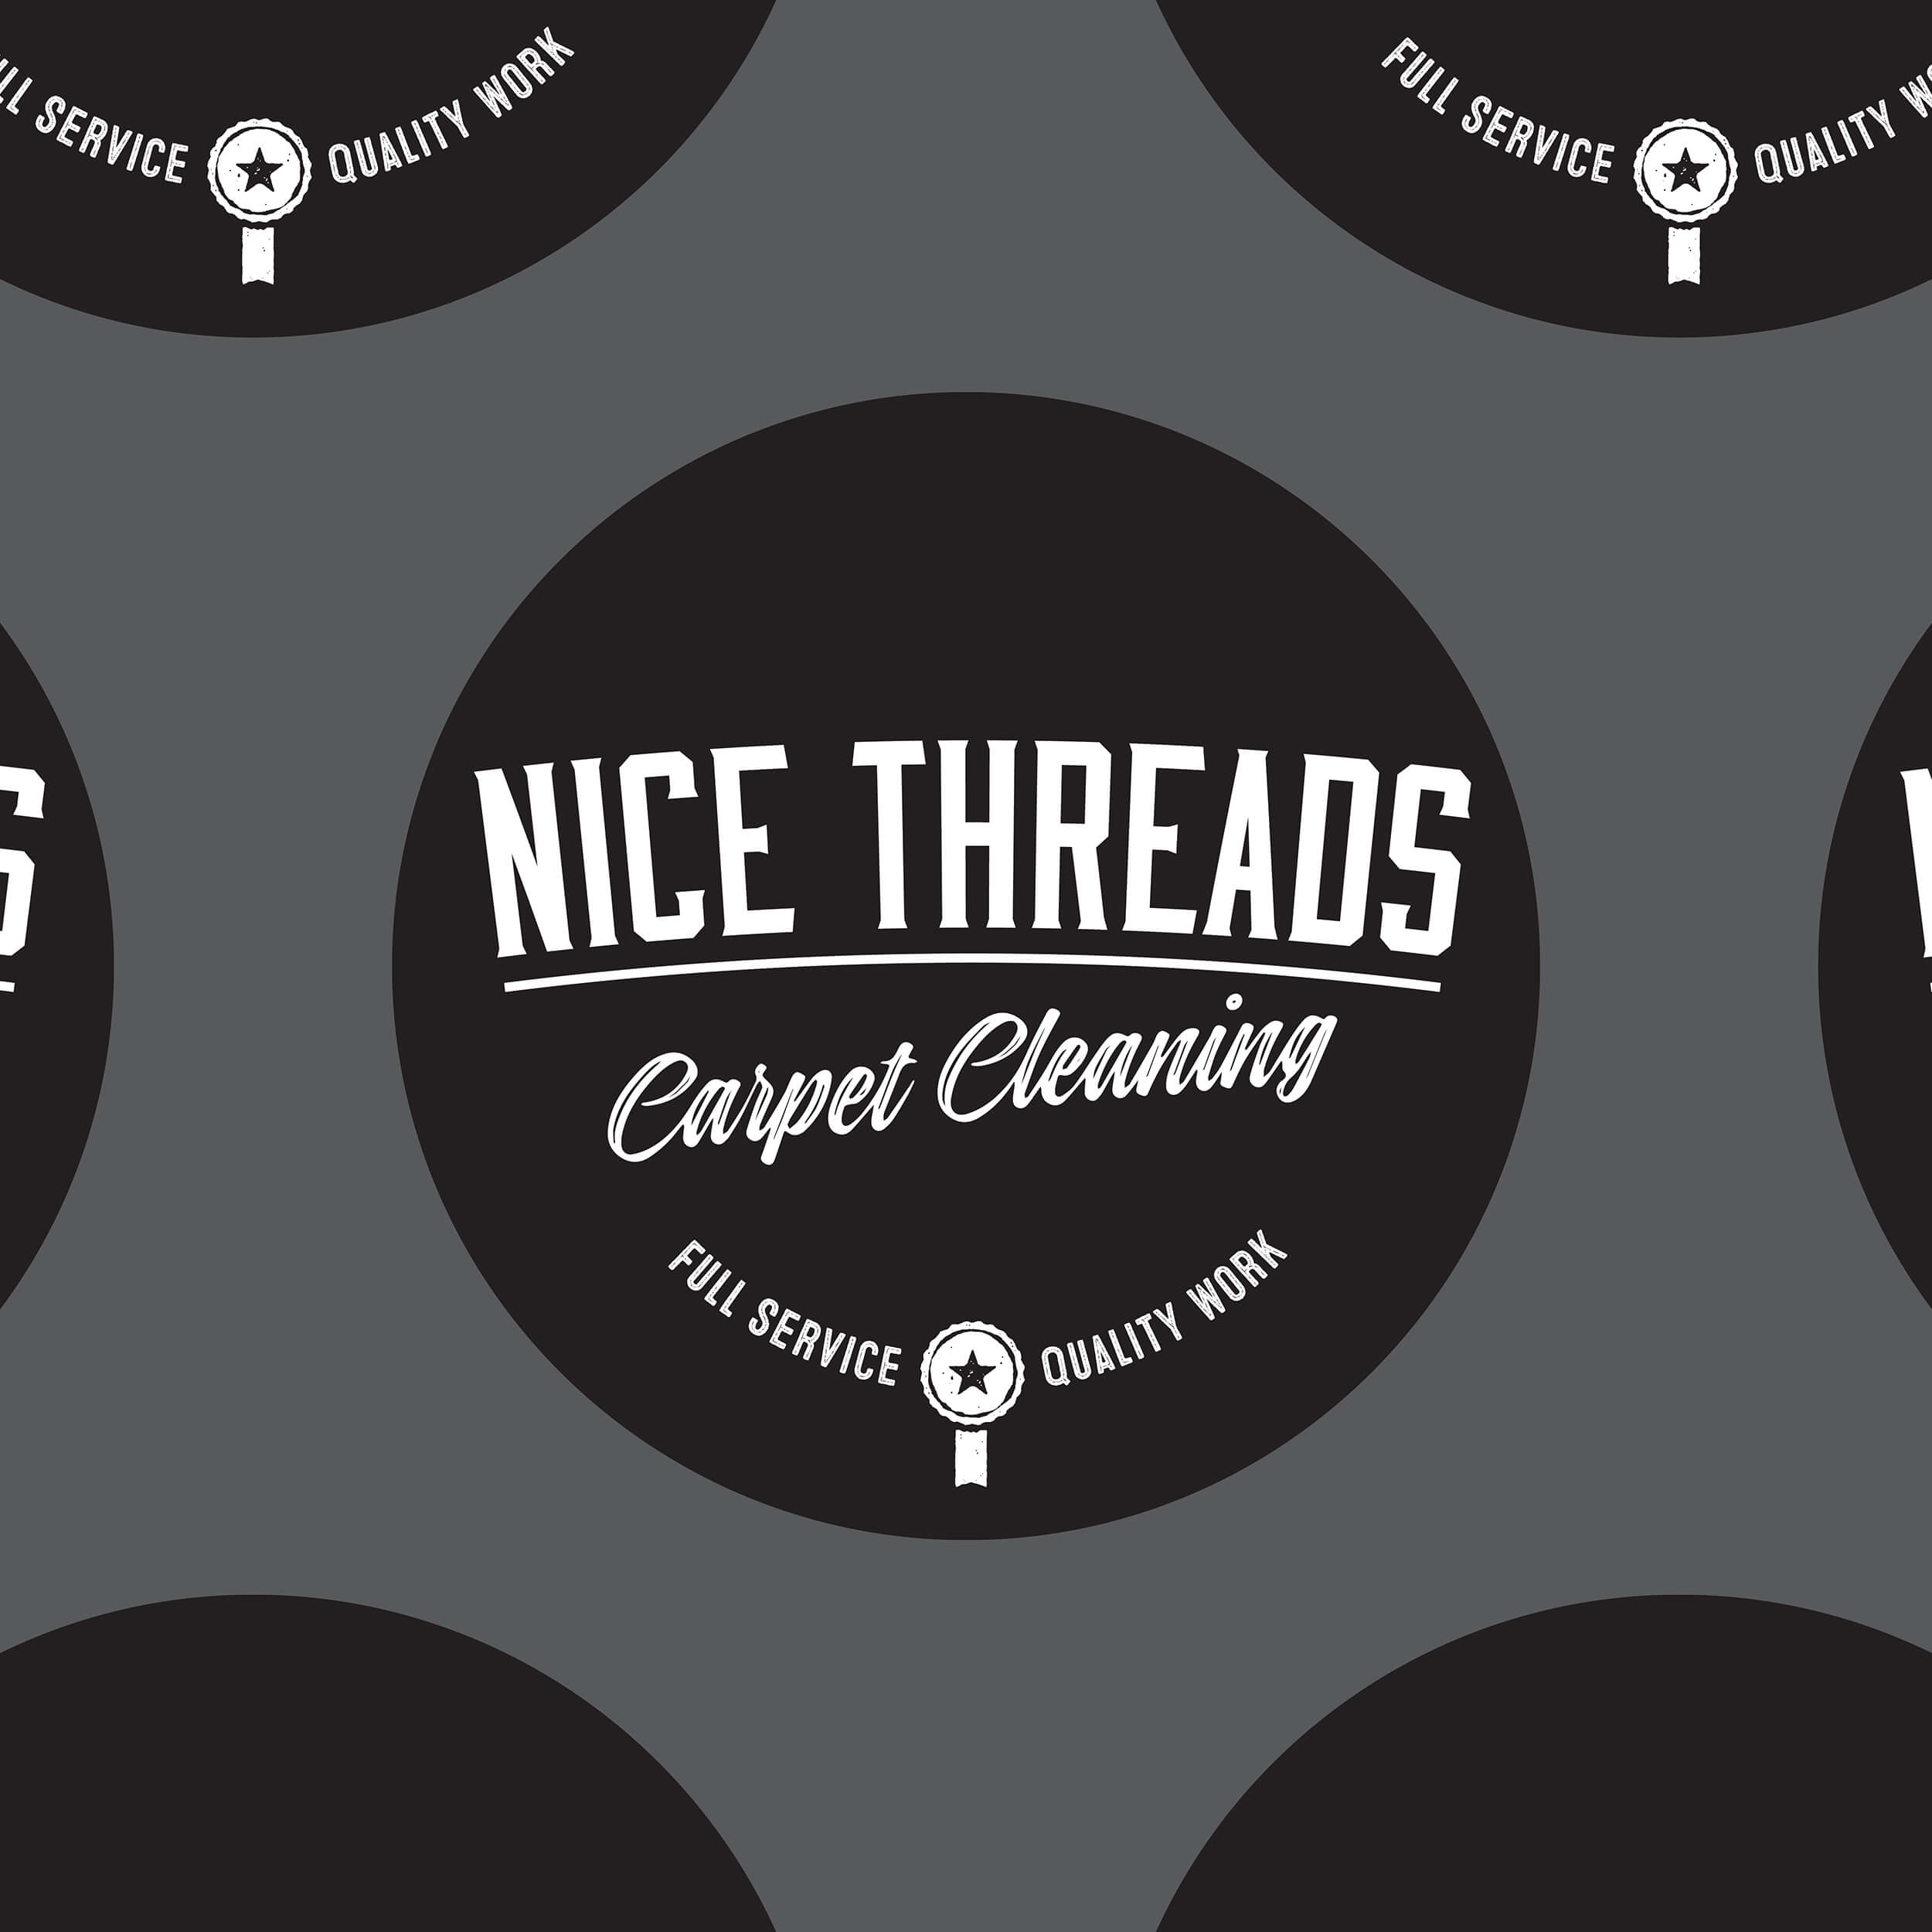 Nice Threads Carpet Cleaning Branding and Web Design